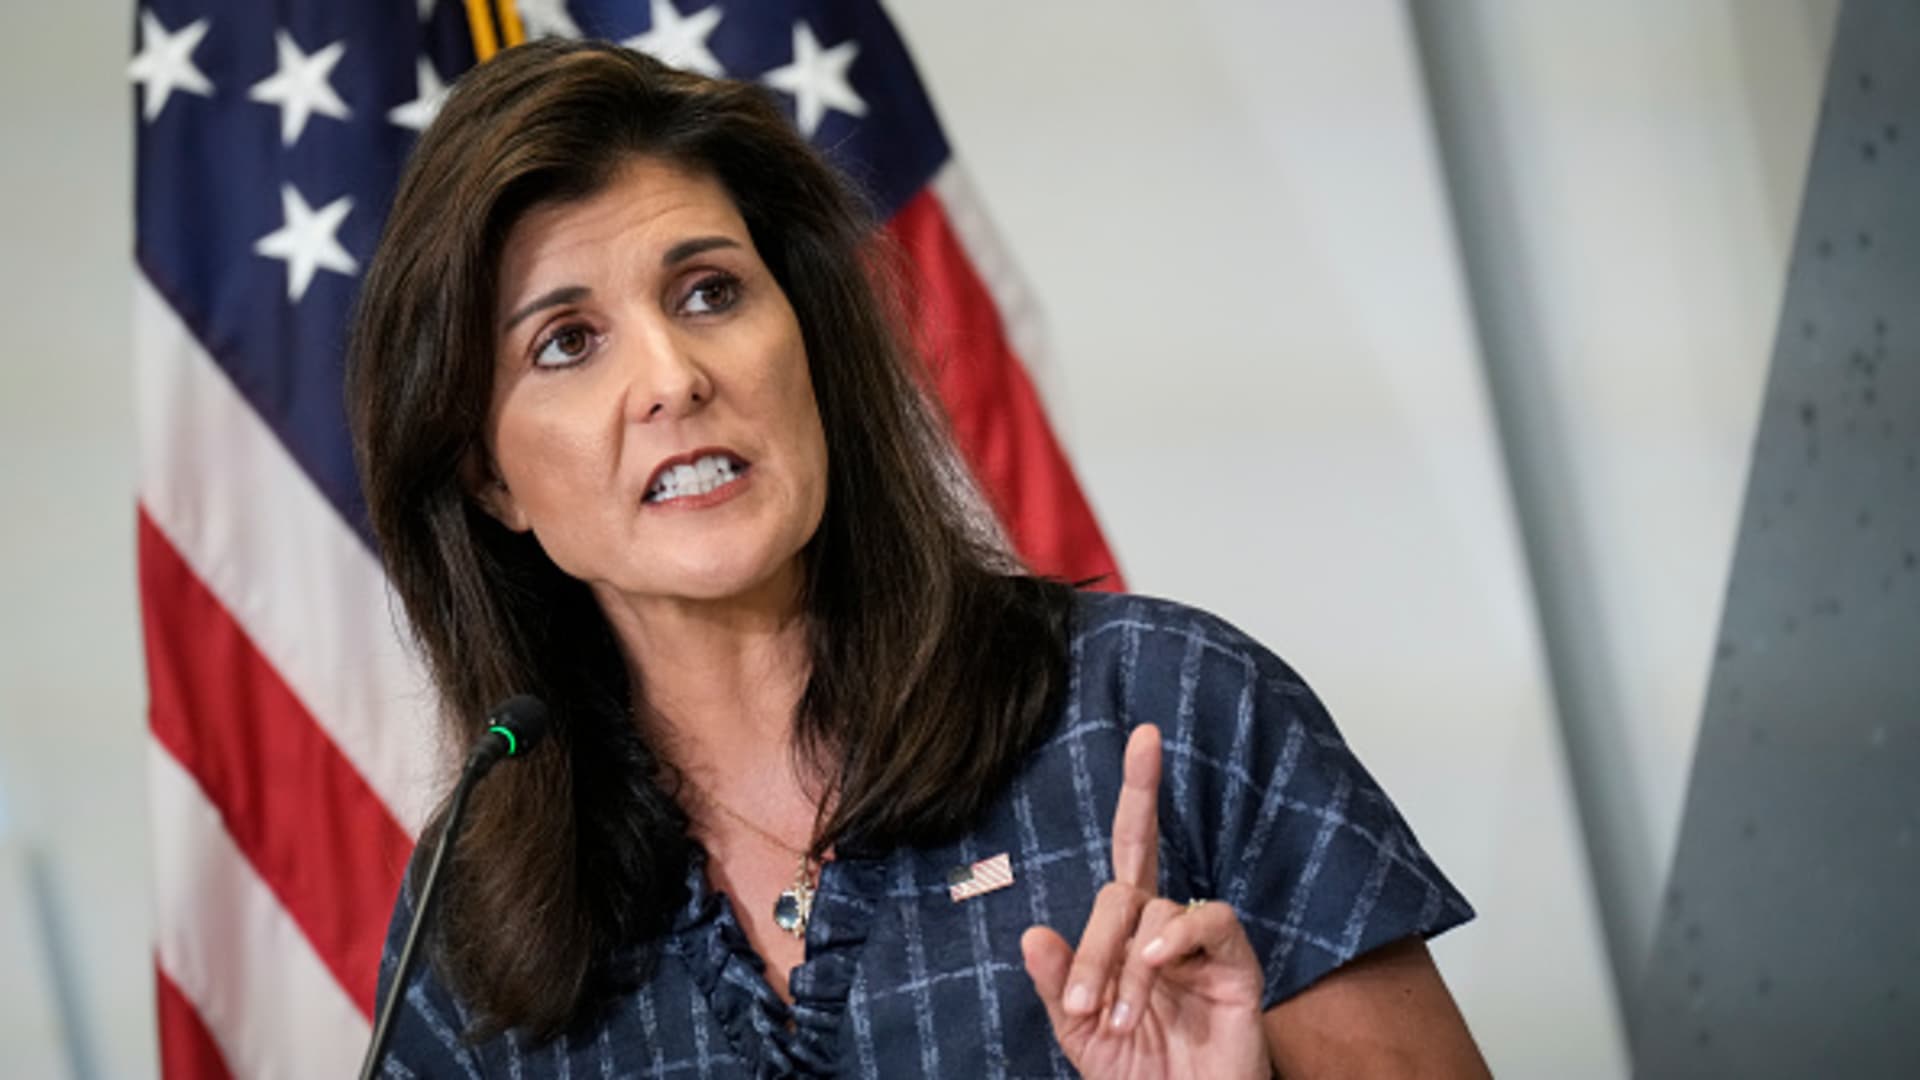 Nikki Haley: ‘Every company needs to have a Plan B’ on China